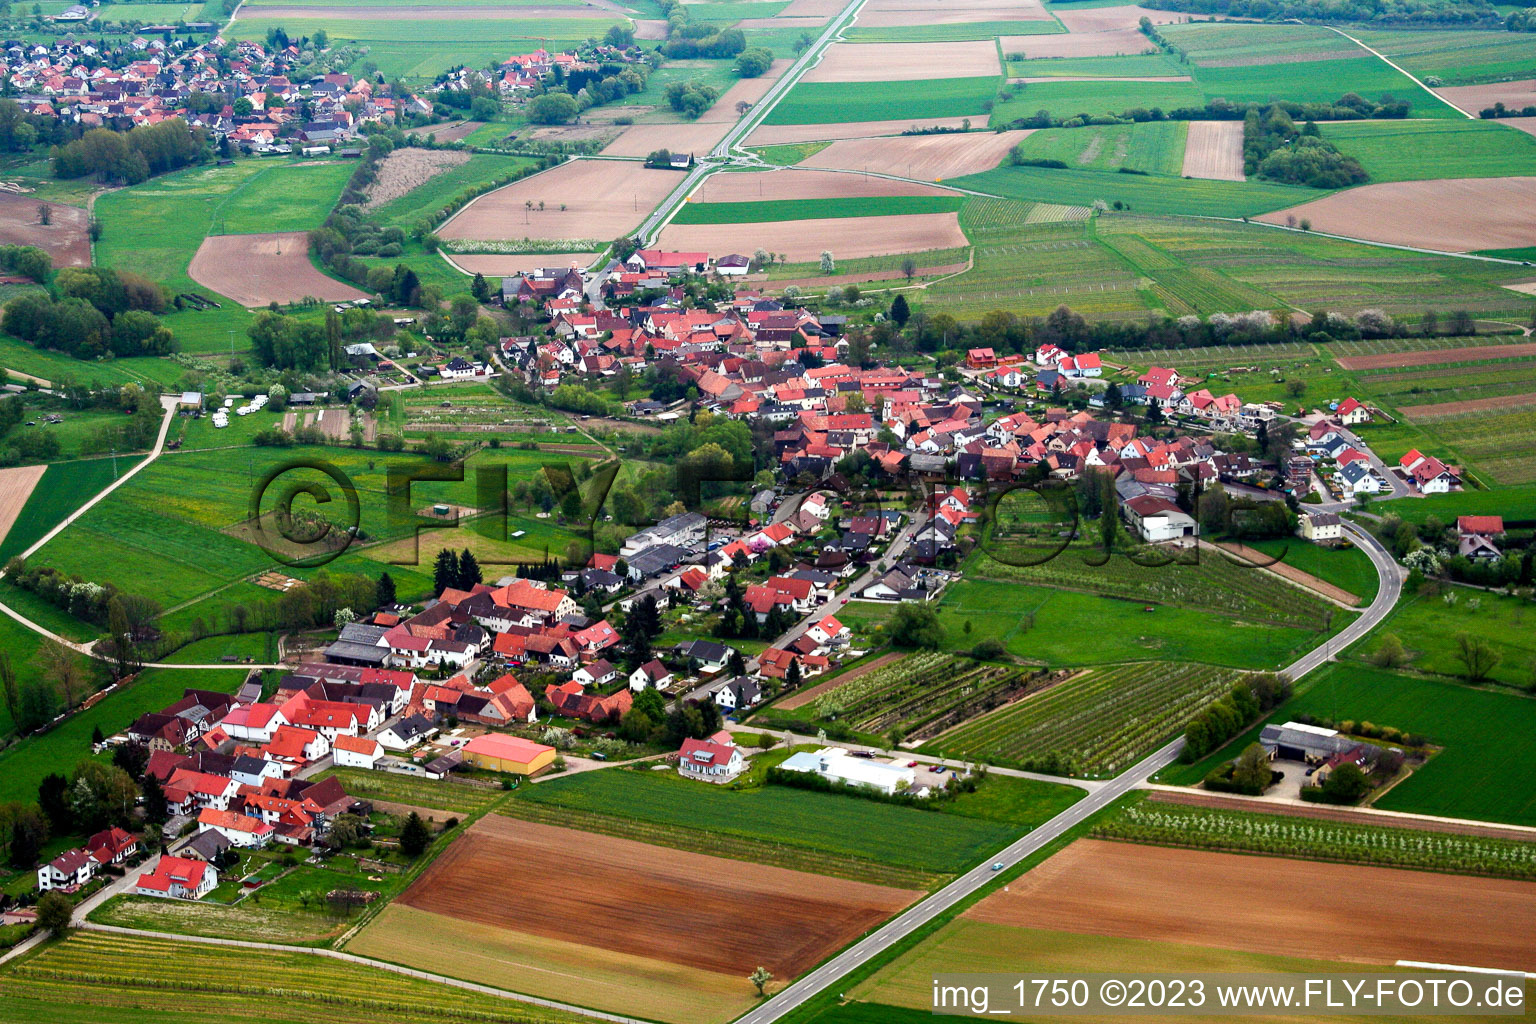 Oberhausen in the state Rhineland-Palatinate, Germany viewn from the air